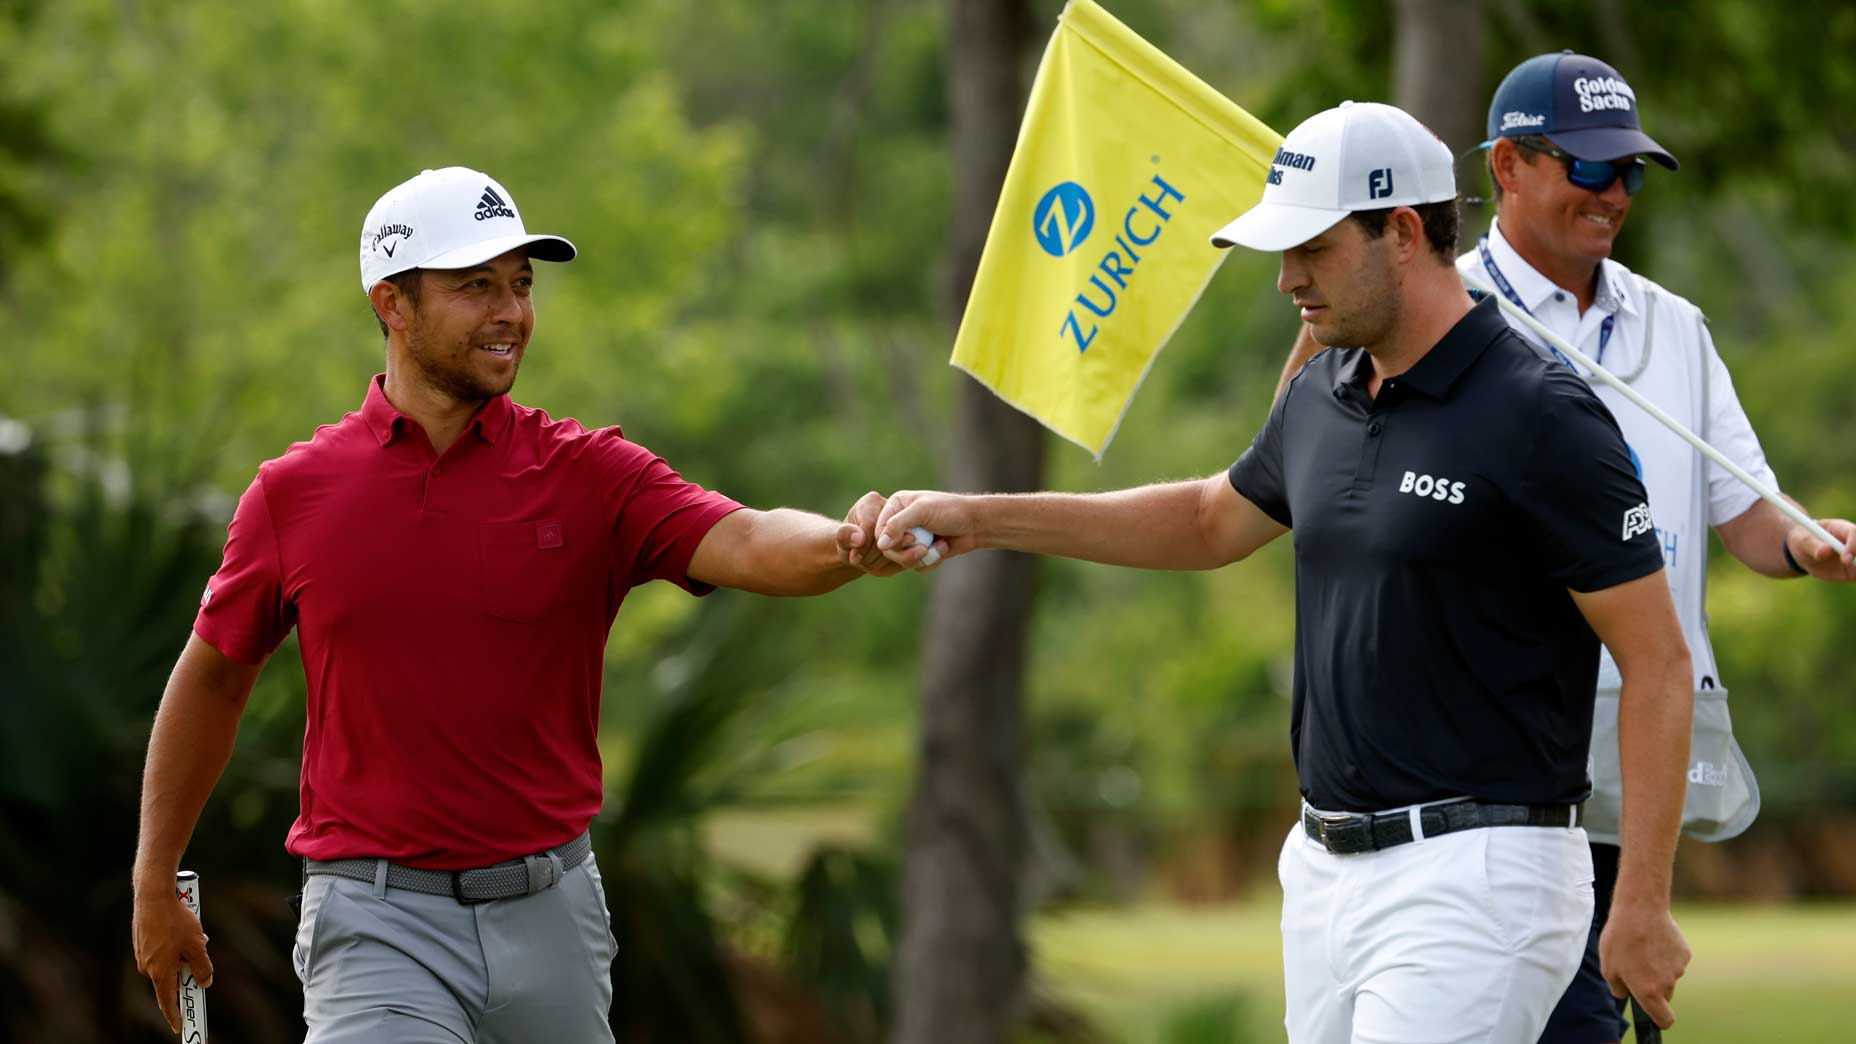 Xander Schauele and Patrick Cantlay fist bump Saturday at the 2022 Zurich Classic